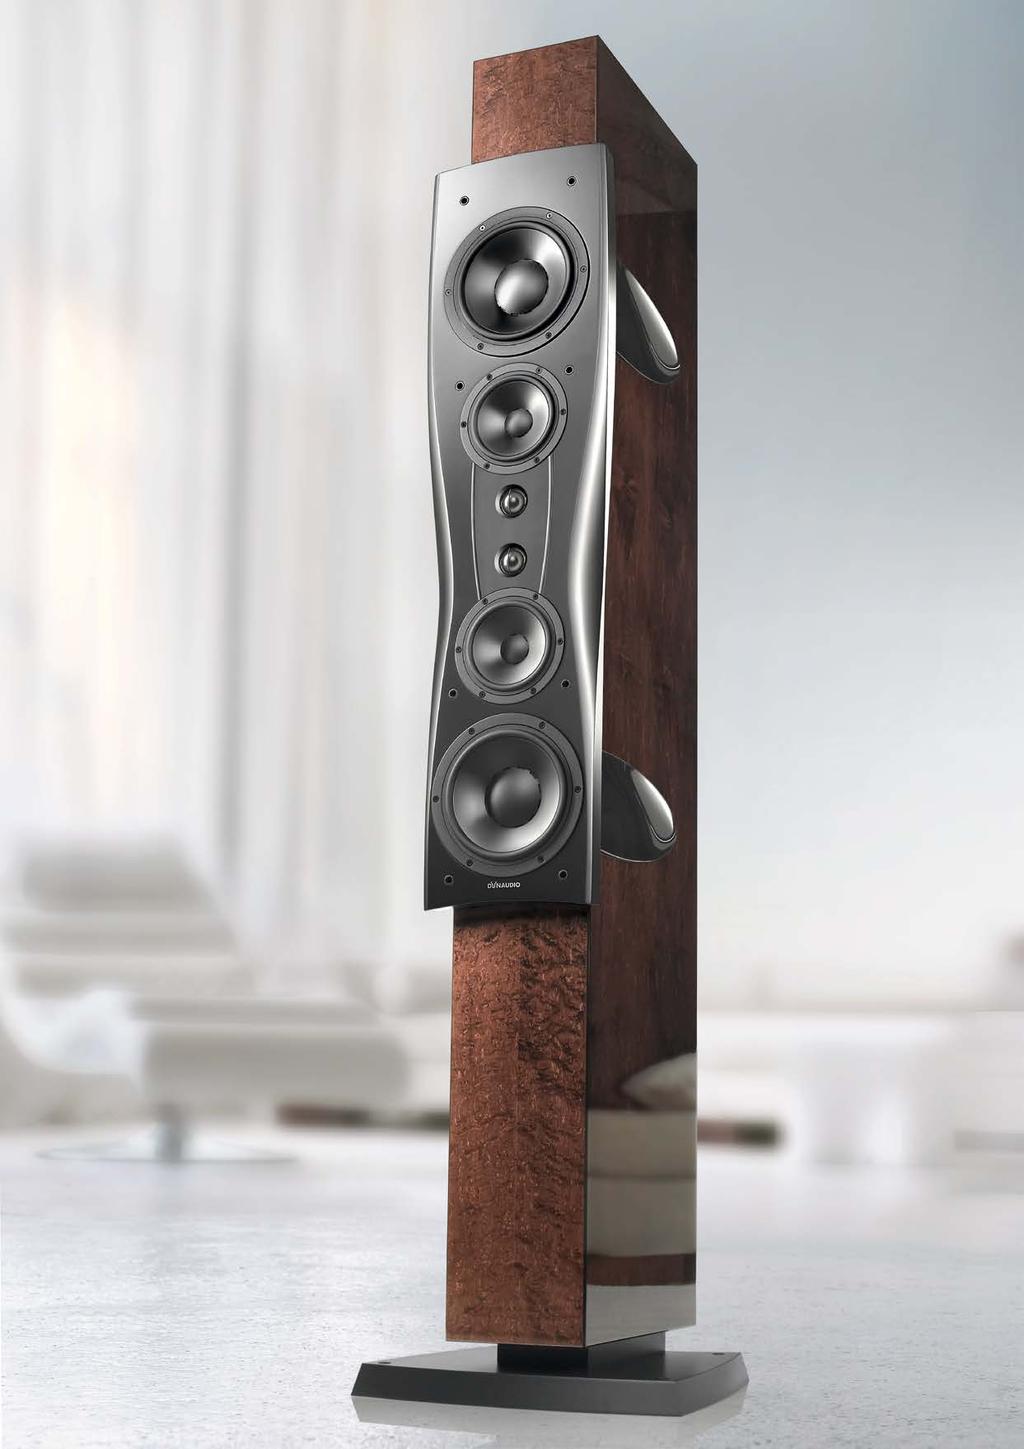 A milestone for Dynaudio. A monument in the history of high-end speakers.